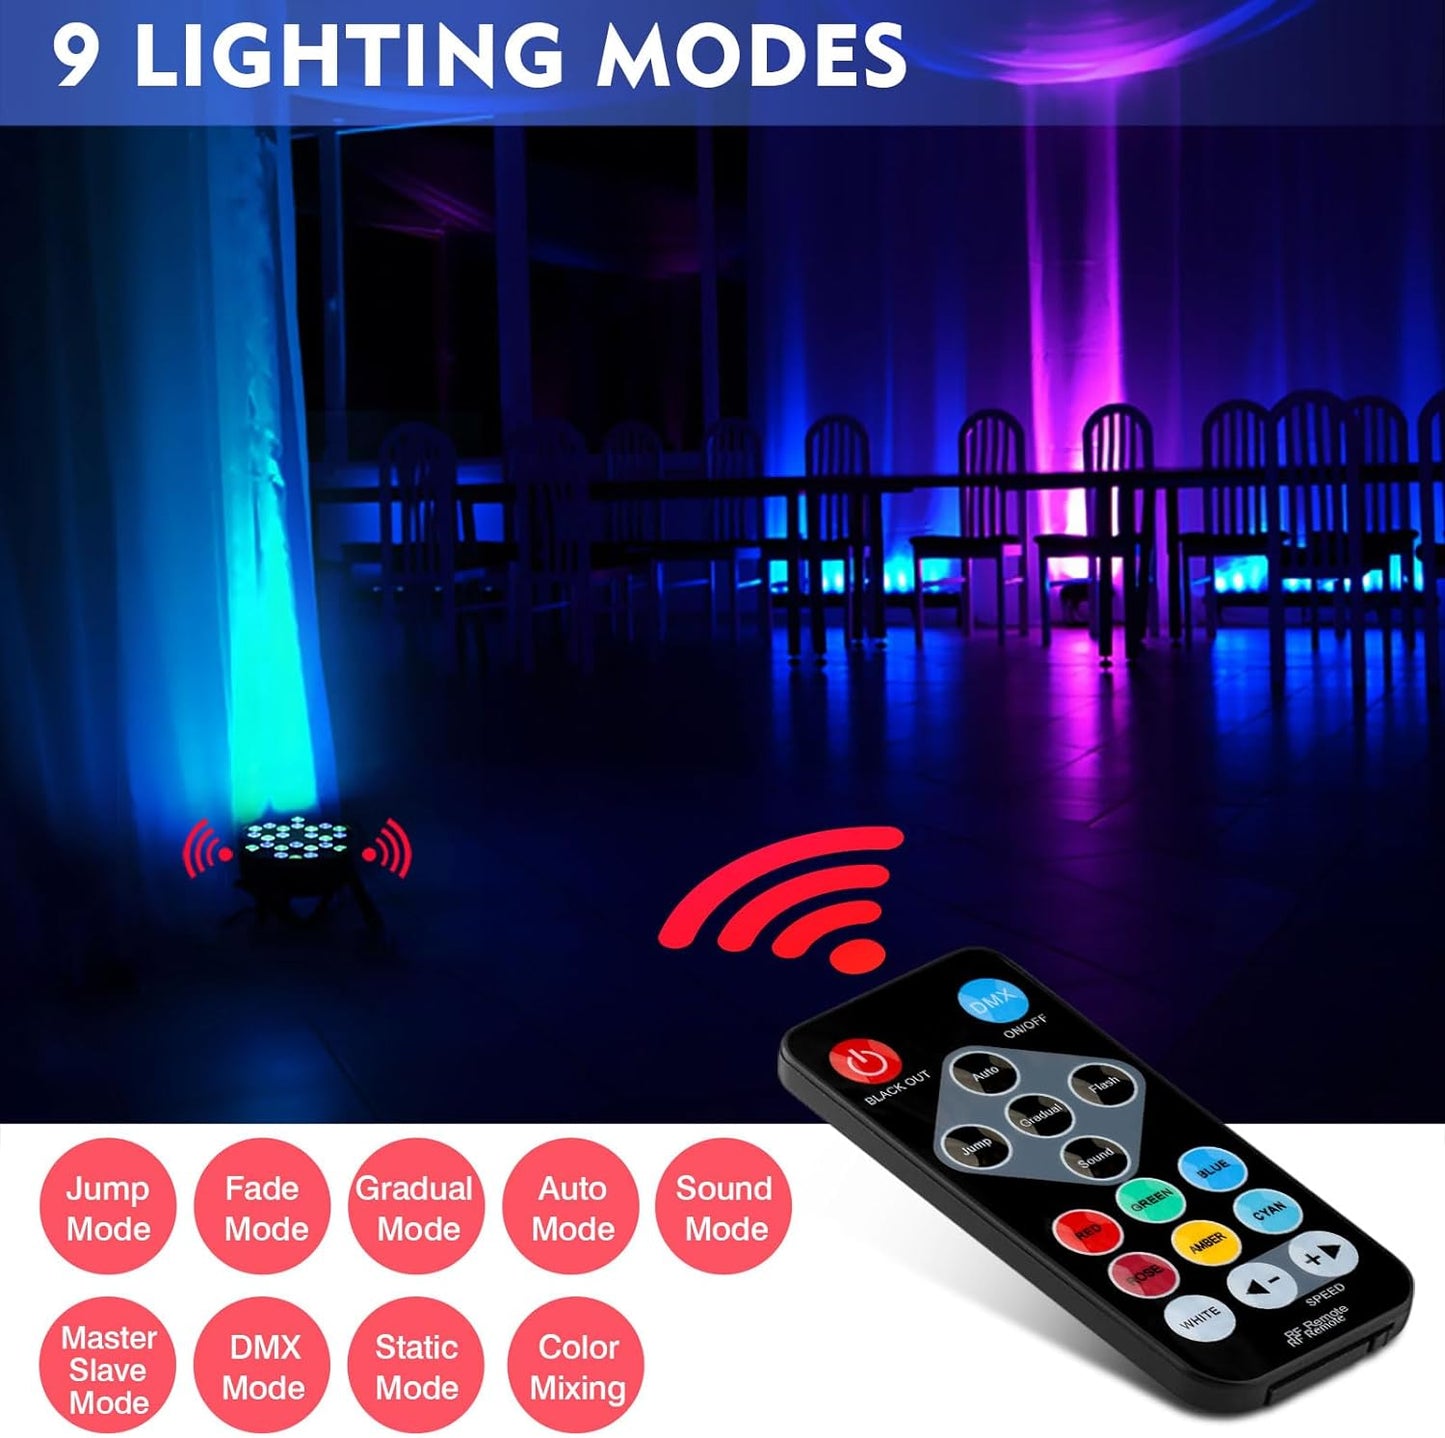 36LEDs Battery Powered Rechargeable RGB Par Lights with Remote, free shipping to US